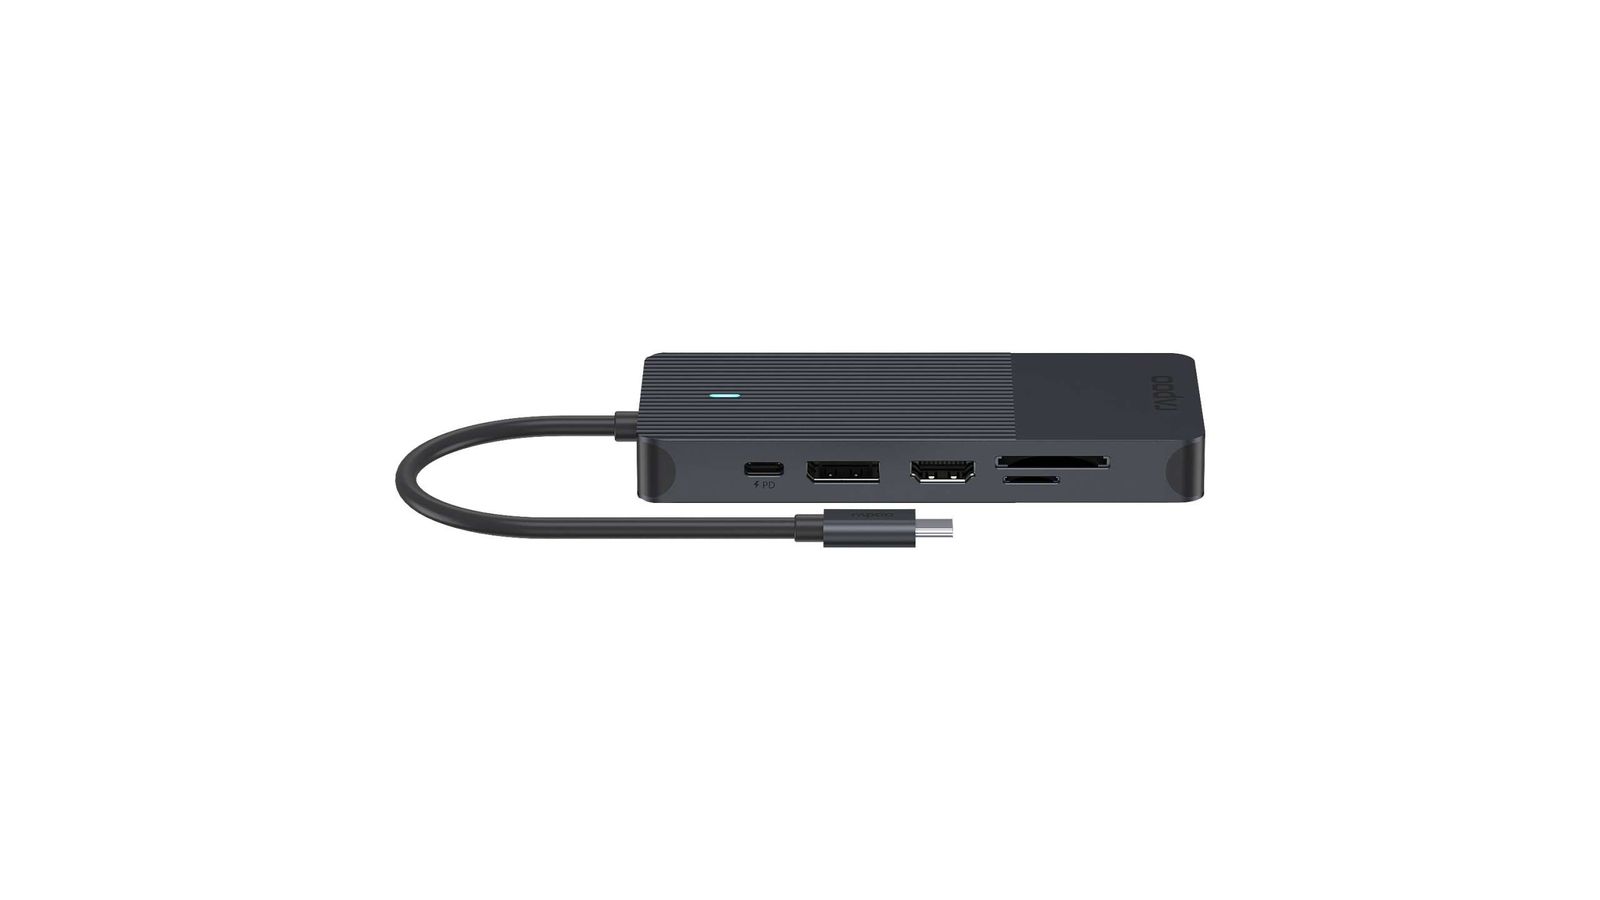 Rapoo UCM-2006 12-in-1 USB-C Multiport Adapter 100W Power Delivery HDMI DisplayPort LAN USB-C USB-A 3.0 microSD AUX v1.0